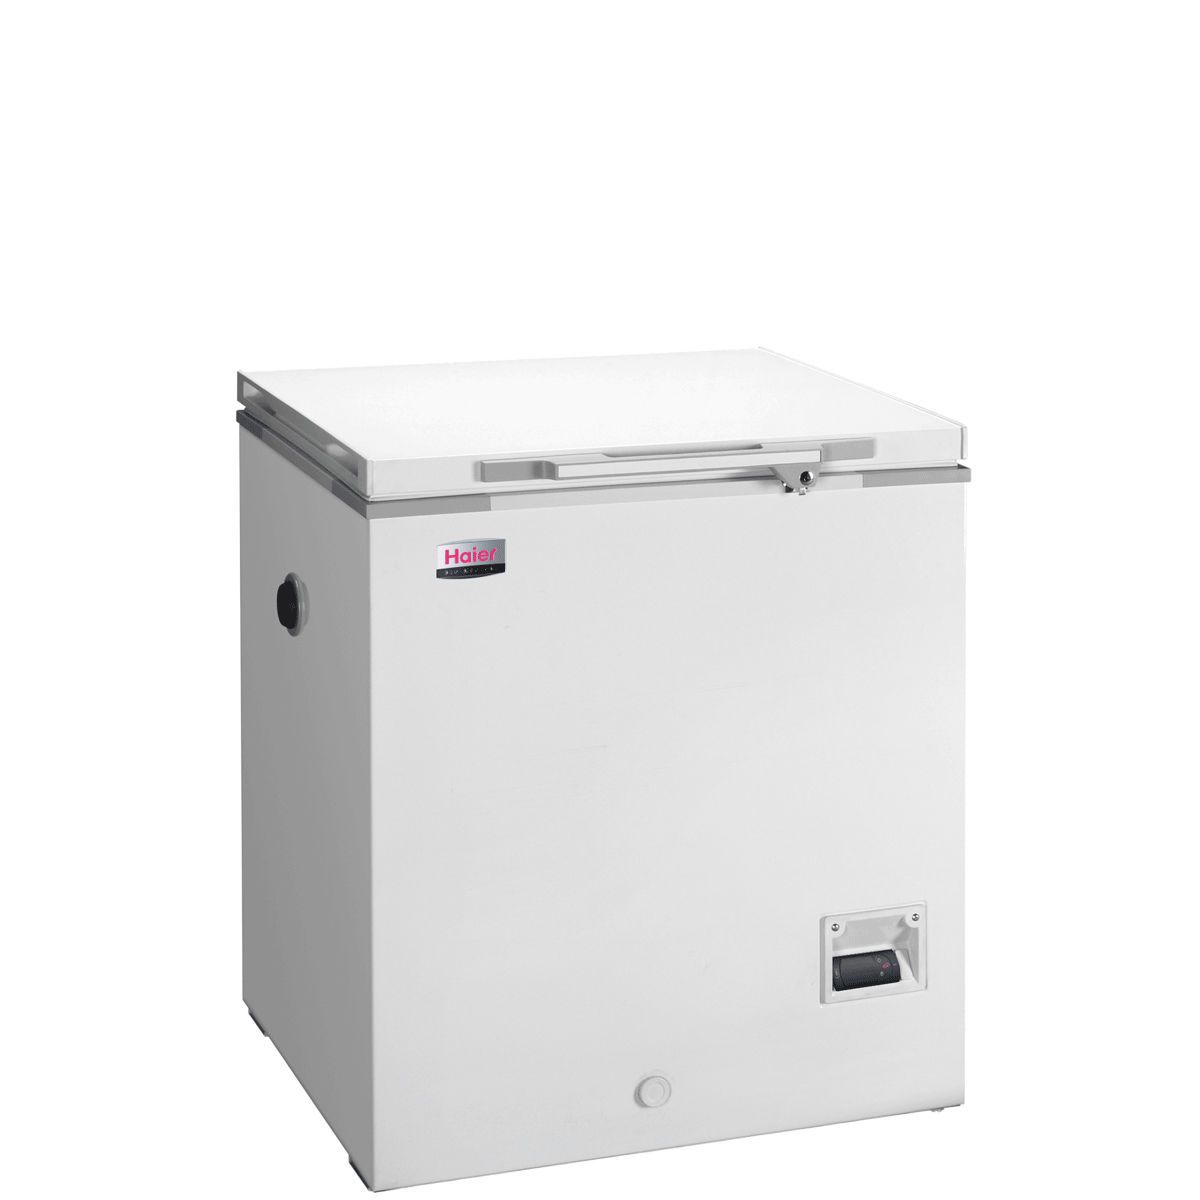 Laboratory freezer / chest / 1-door -40 °C, 100 L | DW-40W100 Haier Medical and Laboratory Products